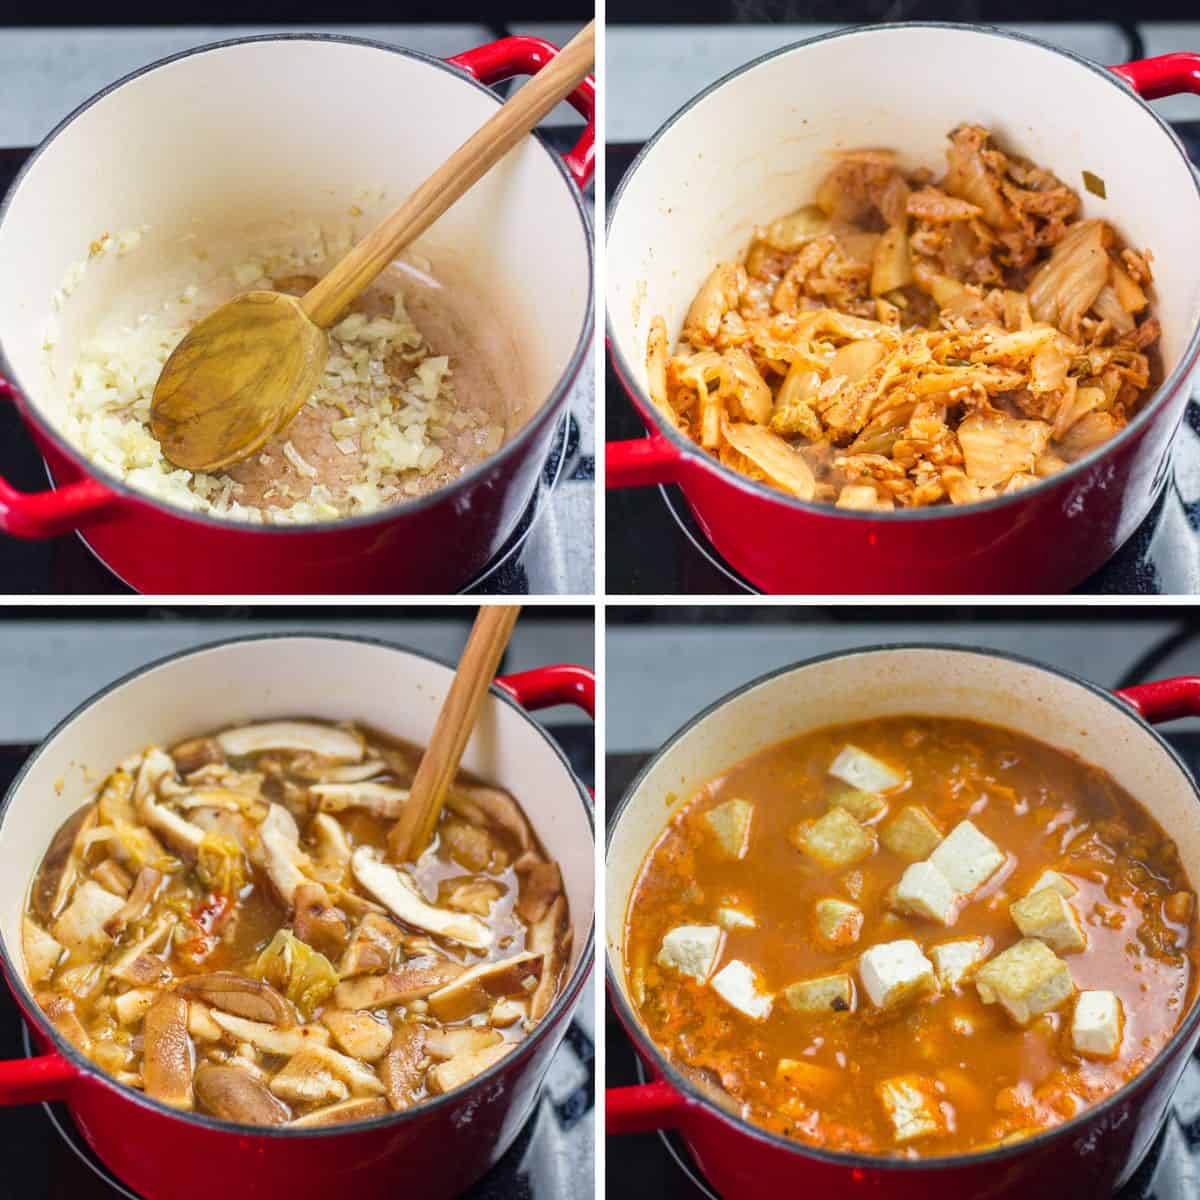 Collage showing 4 stages of Vegan Kimchi Stew cooking in a pot.